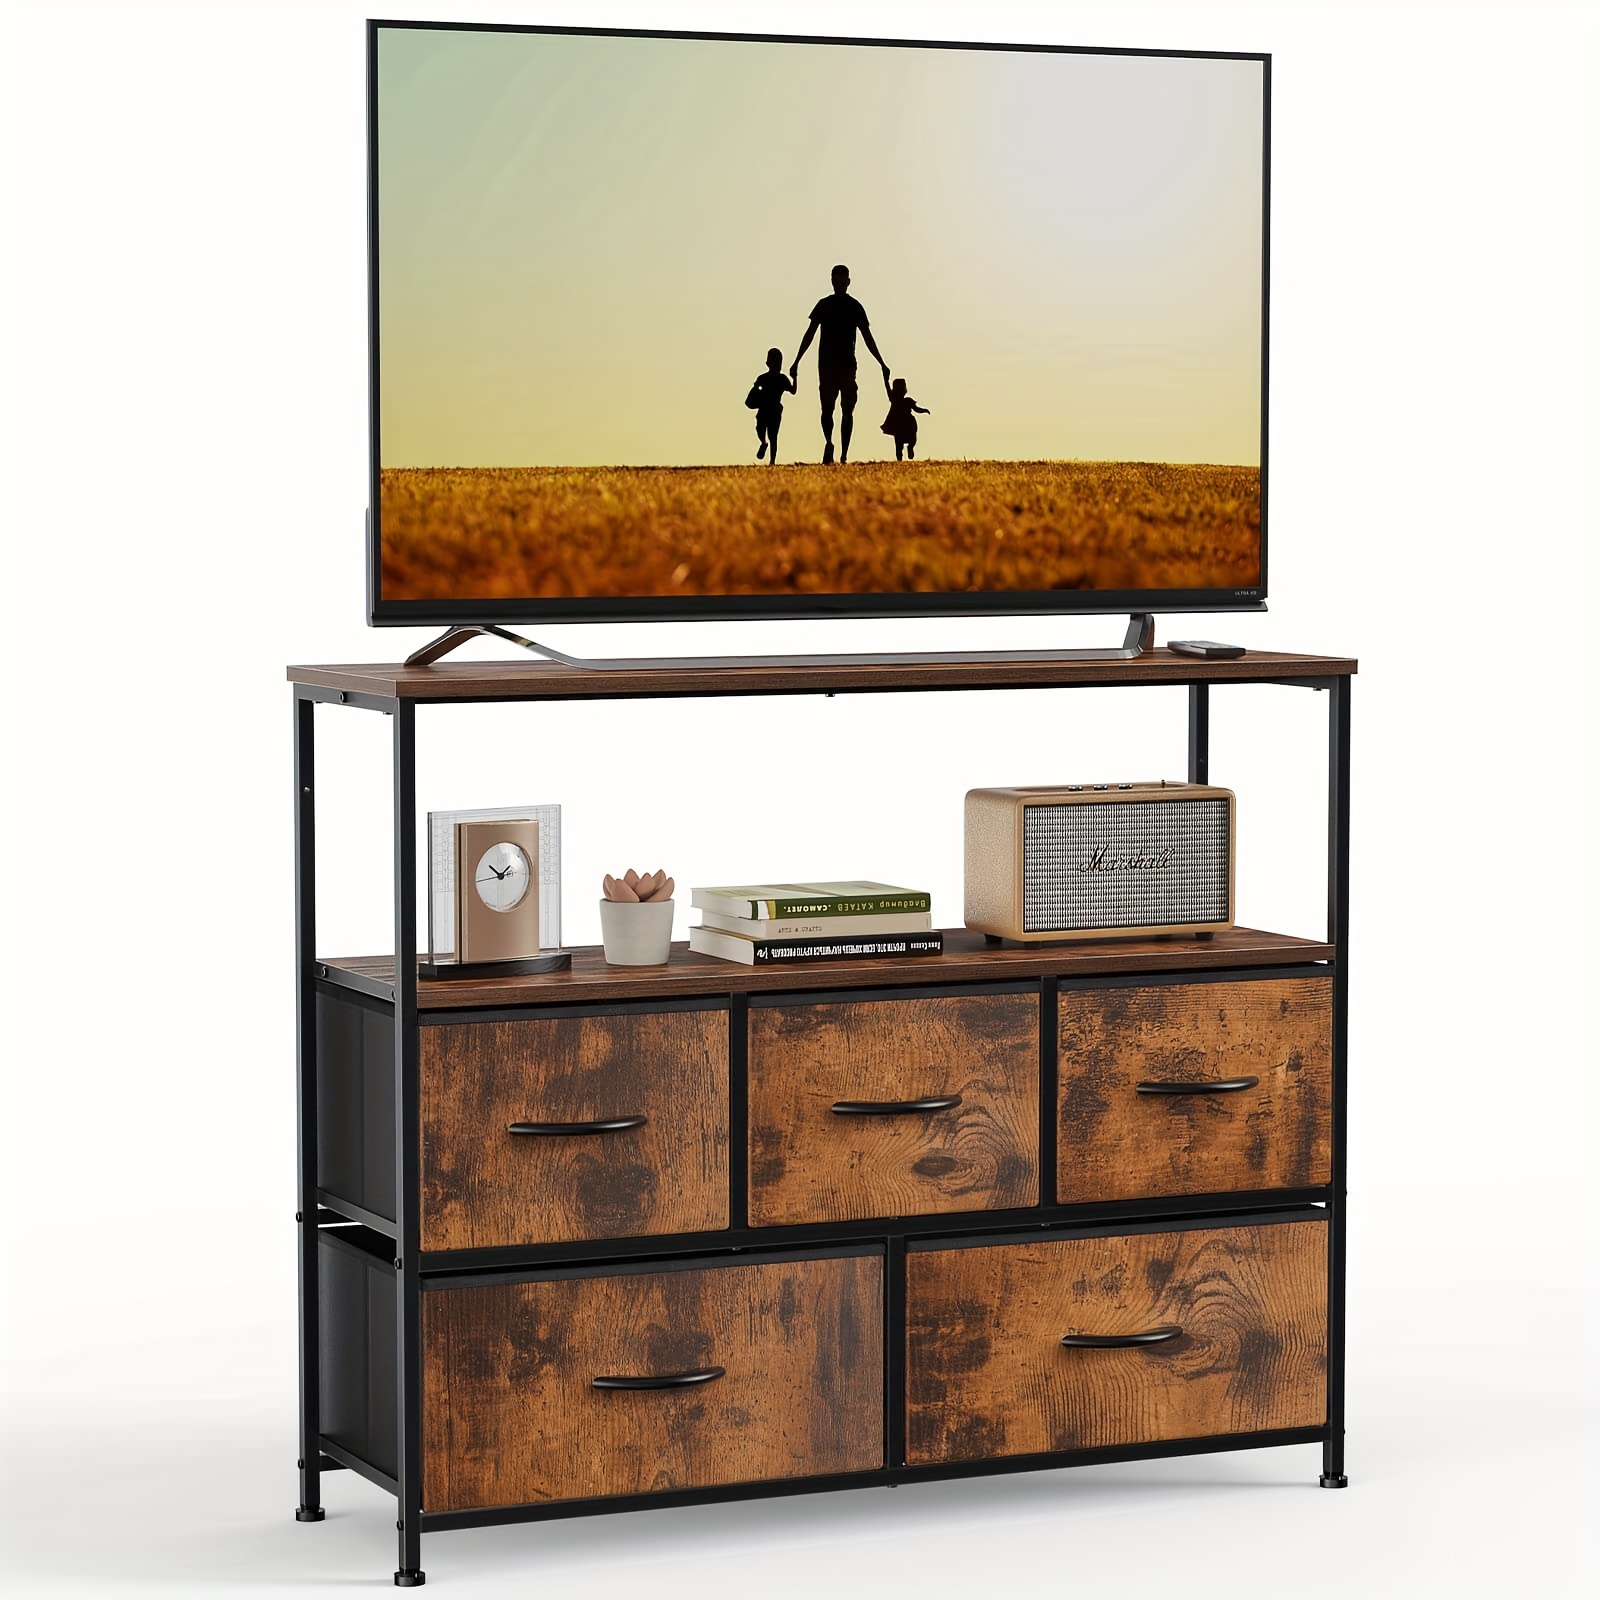 

Dresser Tv Stand, Entertainment Center With 5 Fabric Drawers, Media Console Table For Tv With Open Storage Shelf Dresser For Bedroom/living Room/hallway